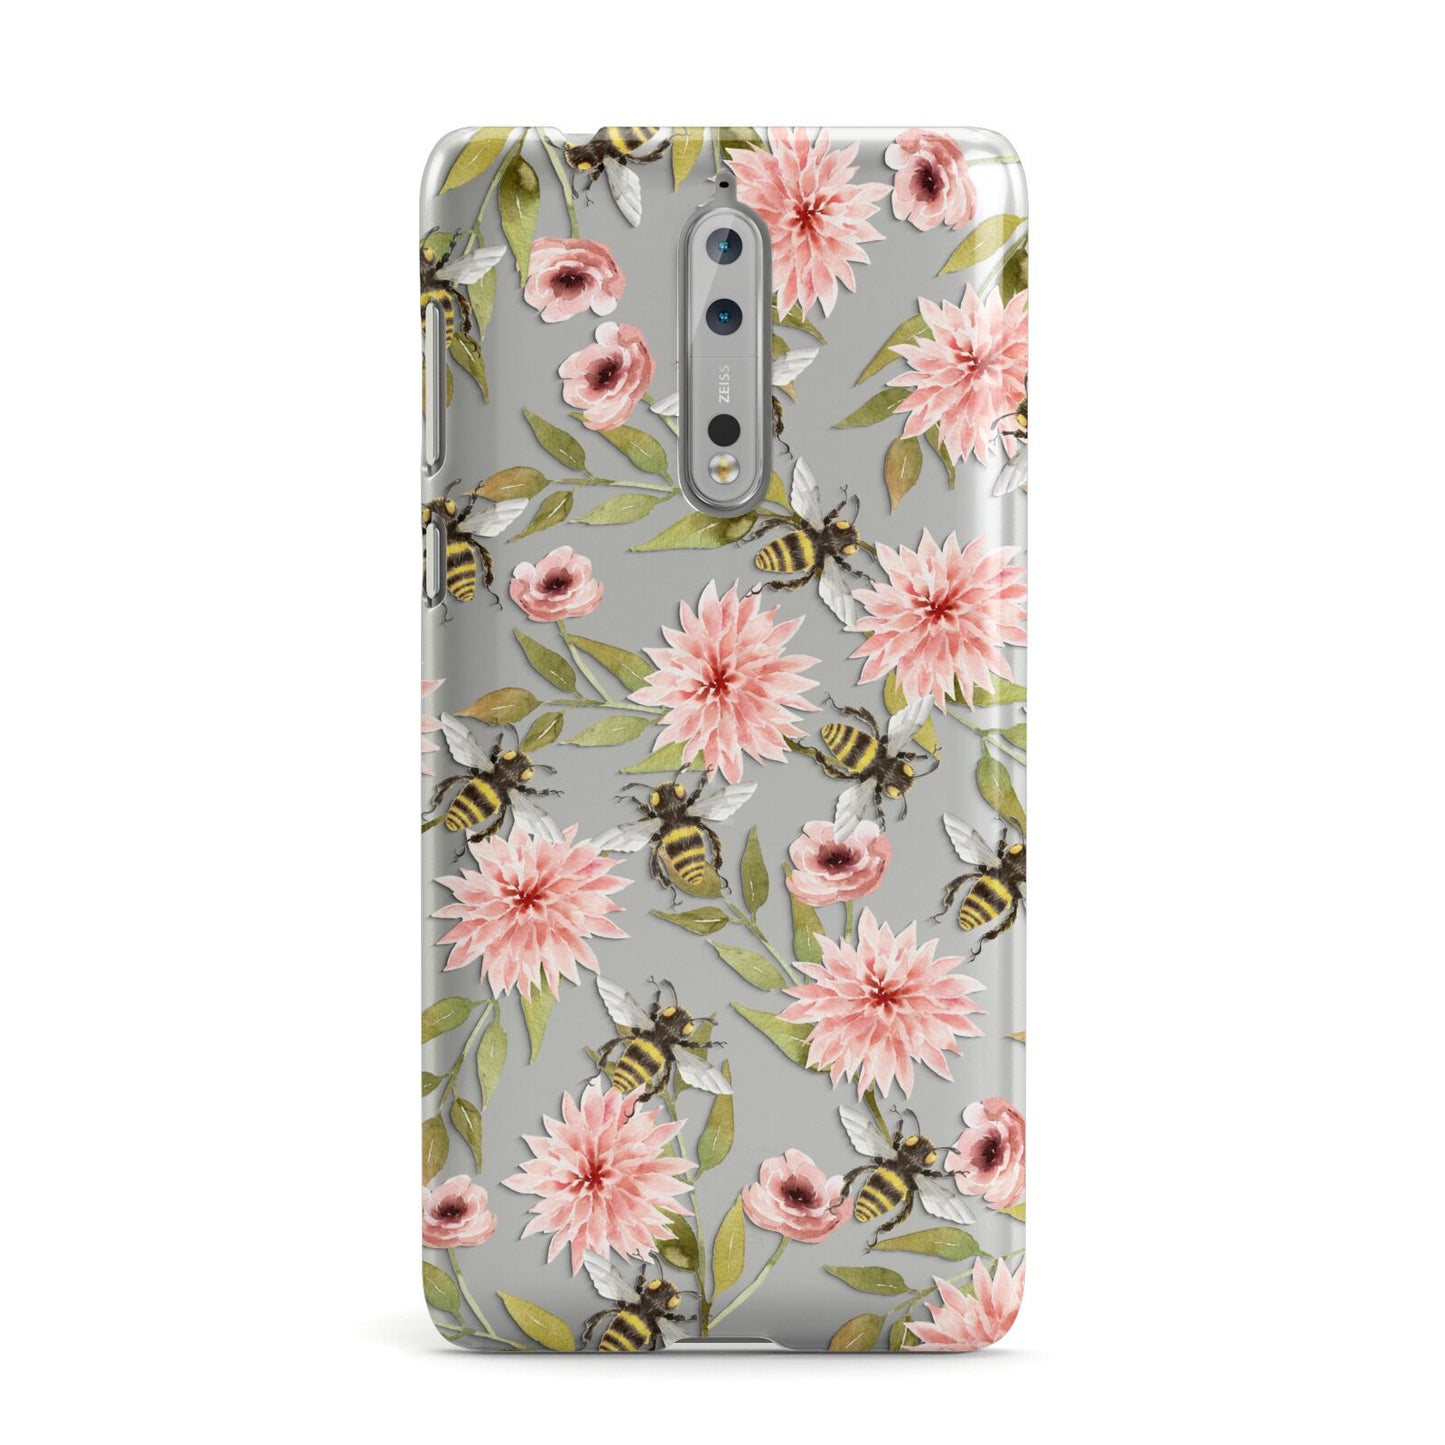 Clear Pink Flowers and Bees Nokia Case